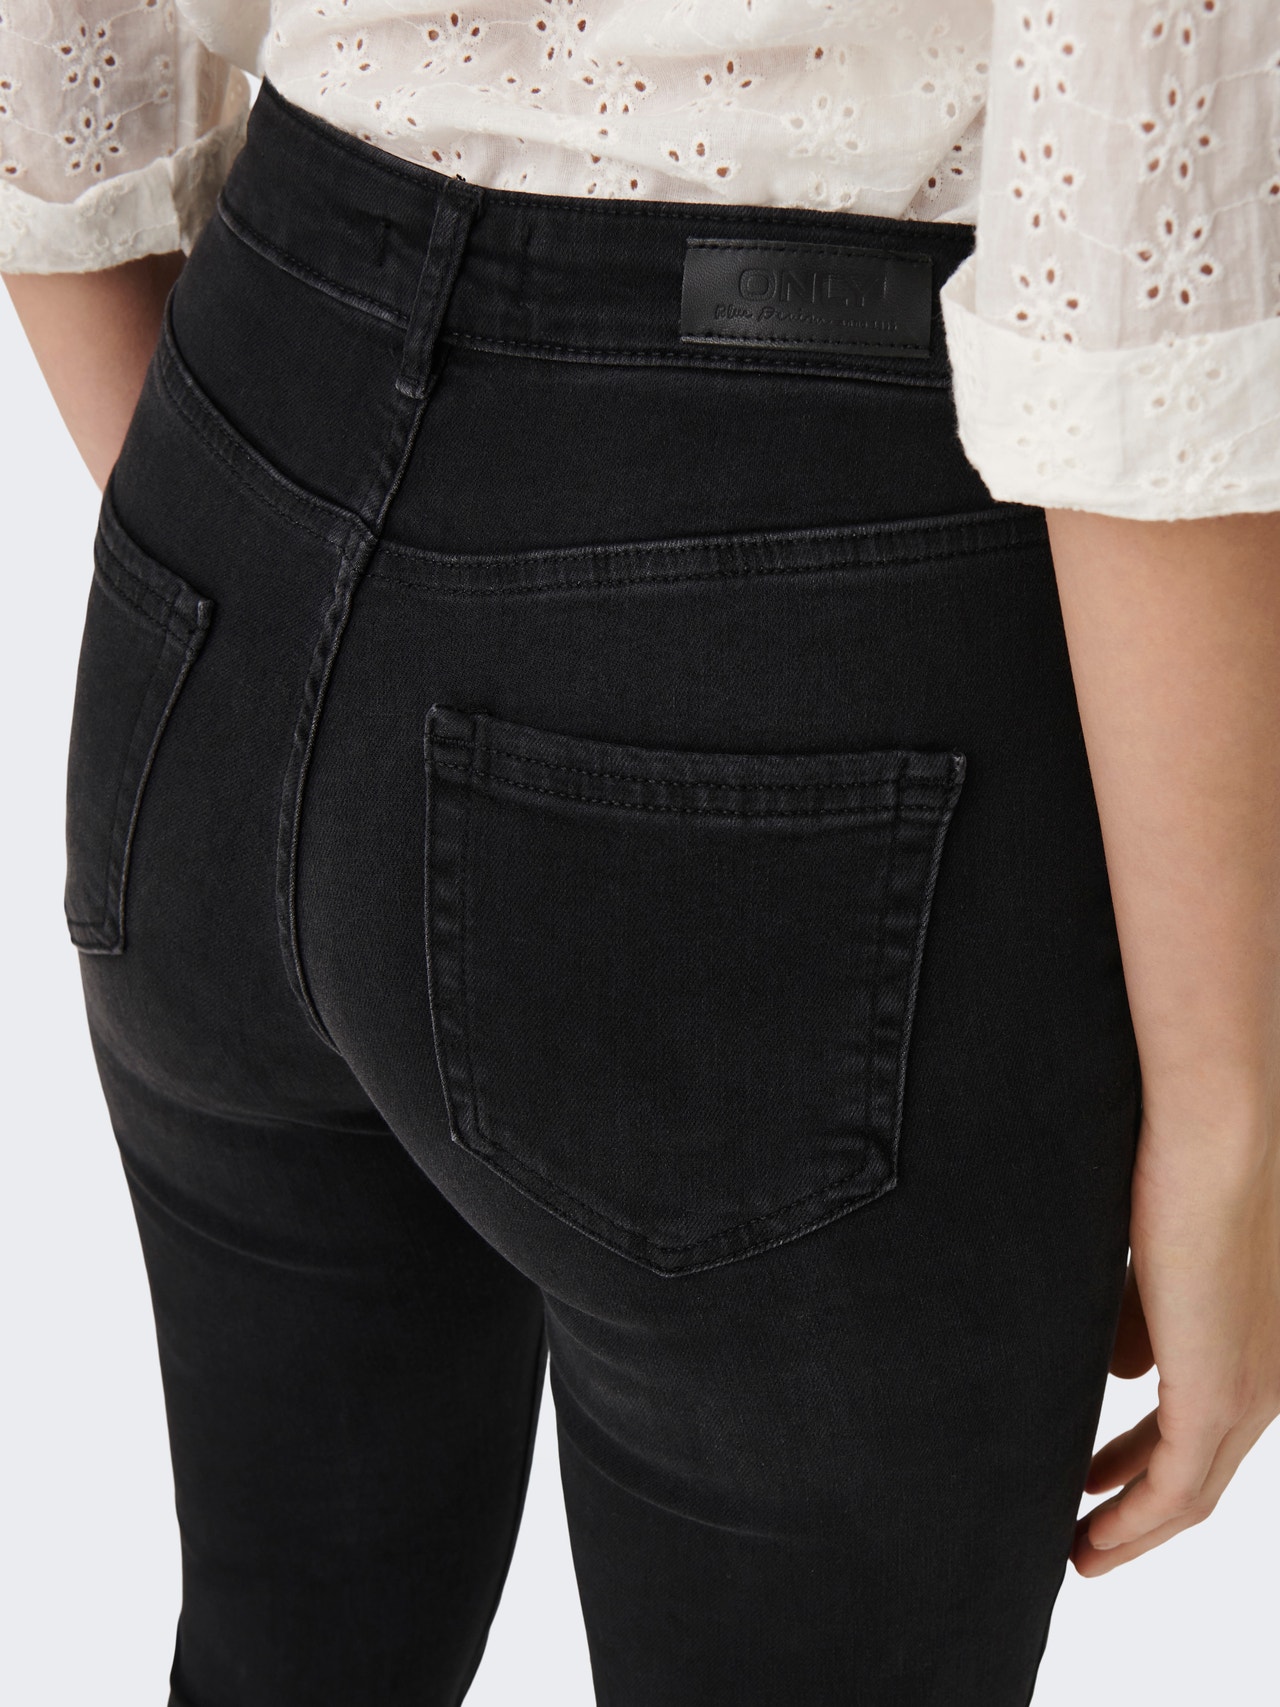 ONLY Skinny Fit High waist Jeans -Washed Black - 15287159